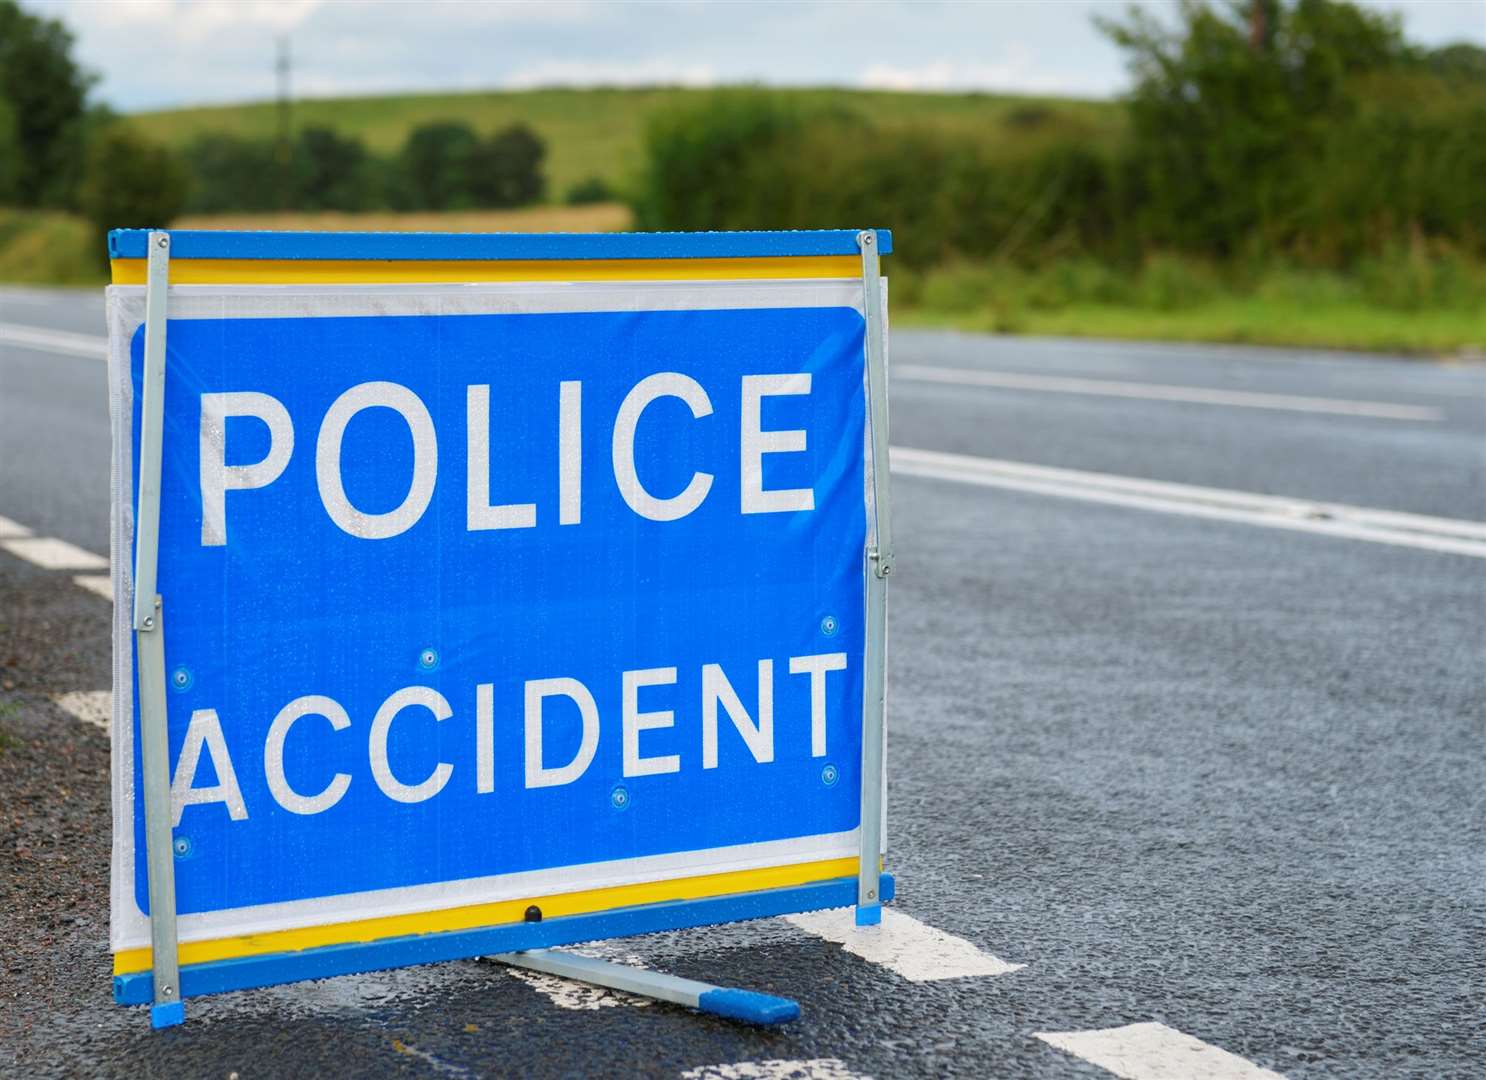 A police accident sign set up at the side of a main road.